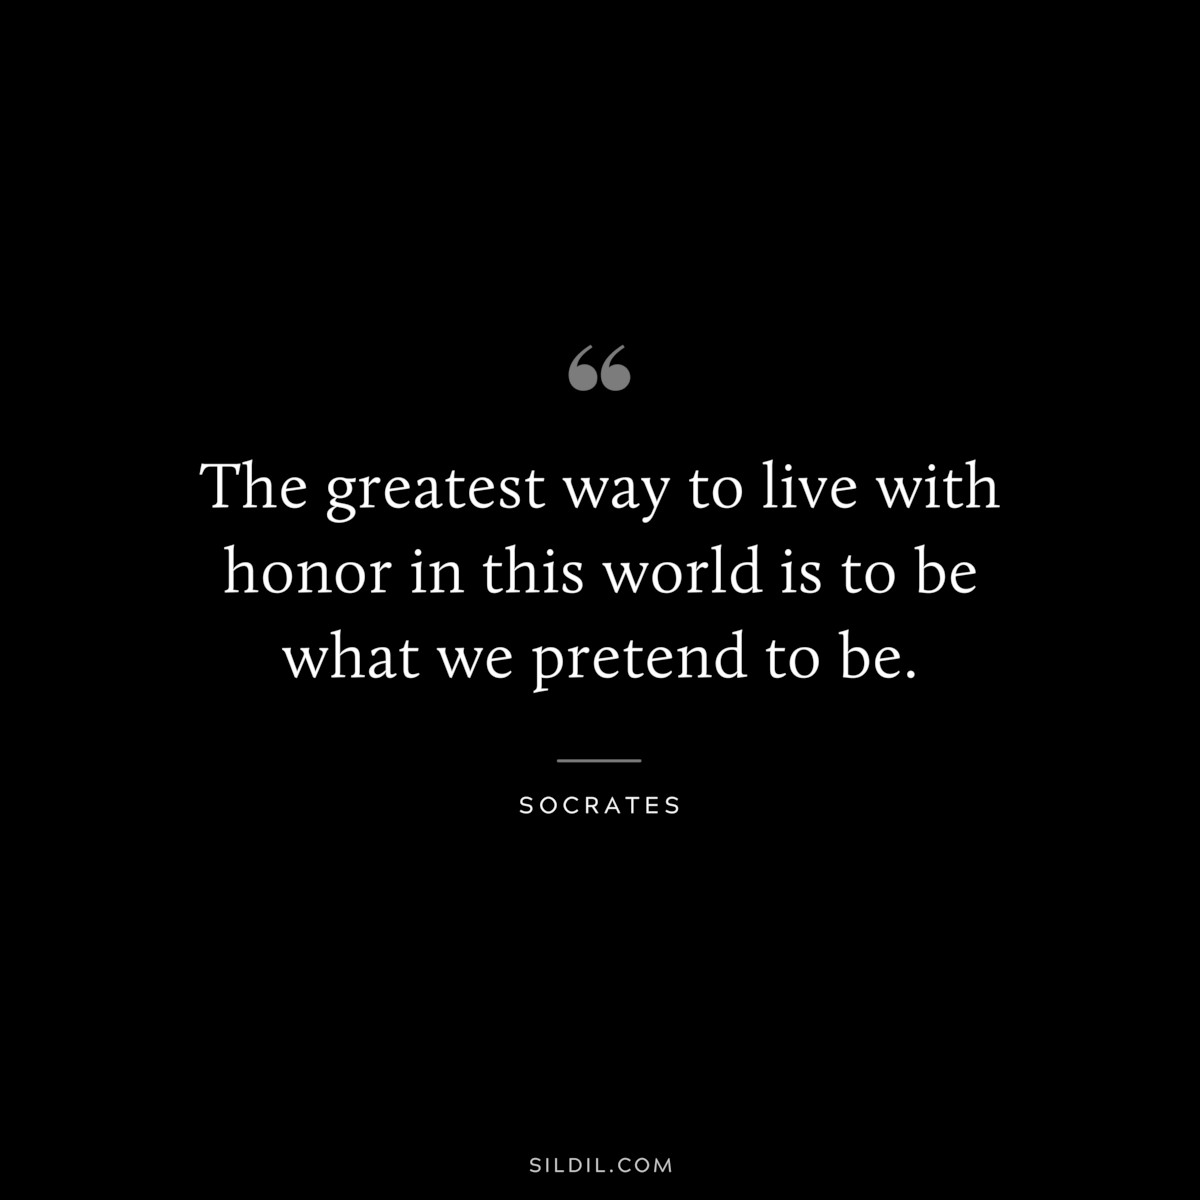 The greatest way to live with honor in this world is to be what we pretend to be. ― Socrates